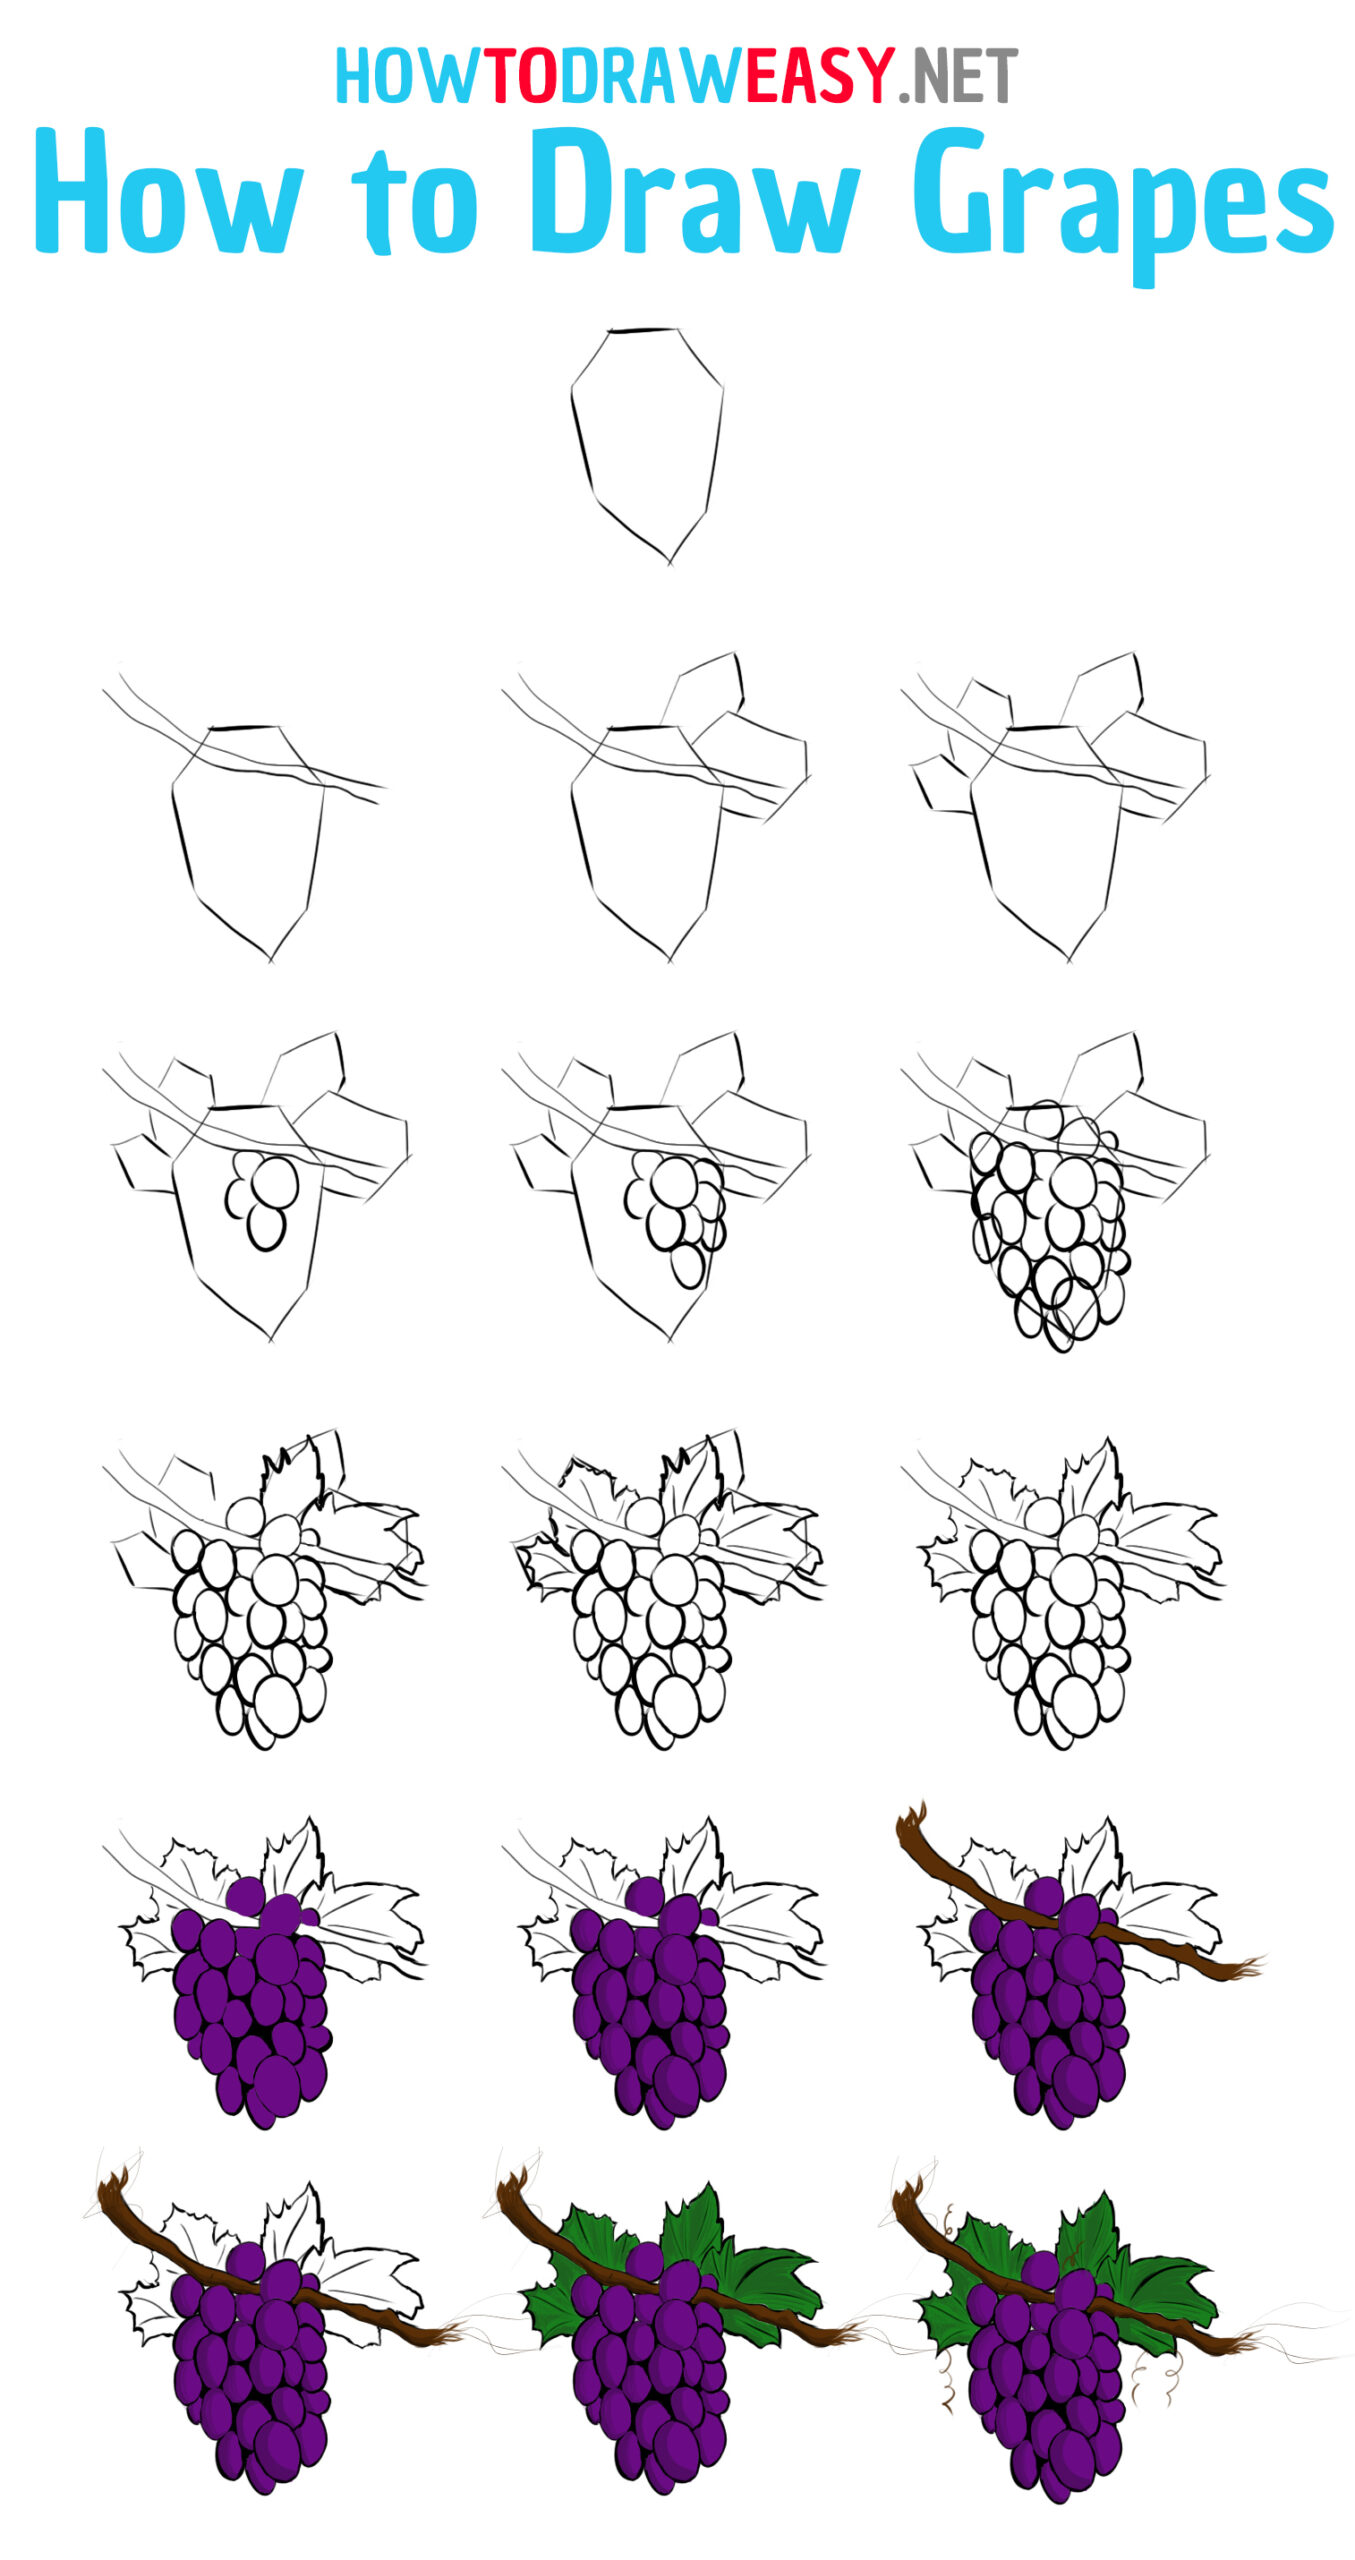 How to Draw Grapes Step by Step